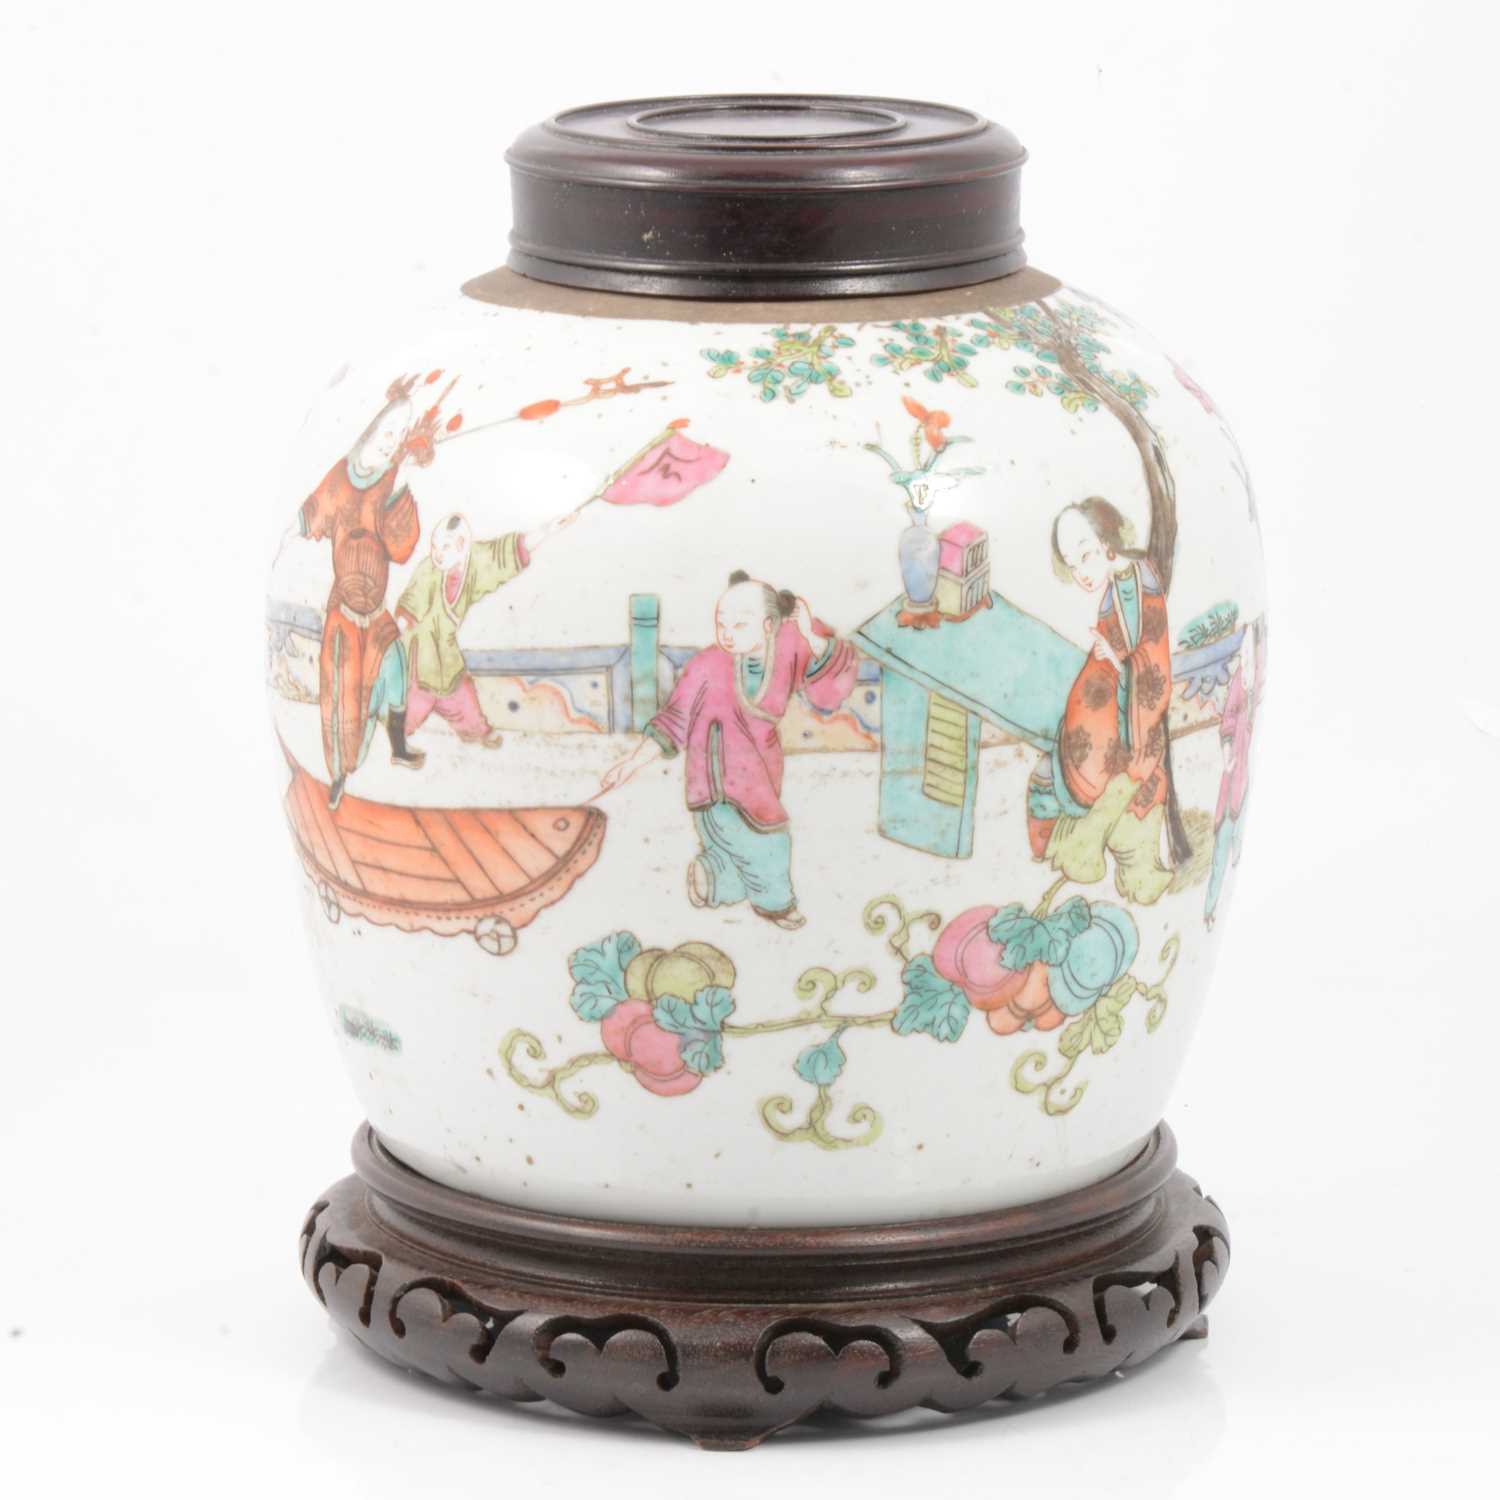 Lot 90 - Chinese pottery jar with hardwood cover and stand.